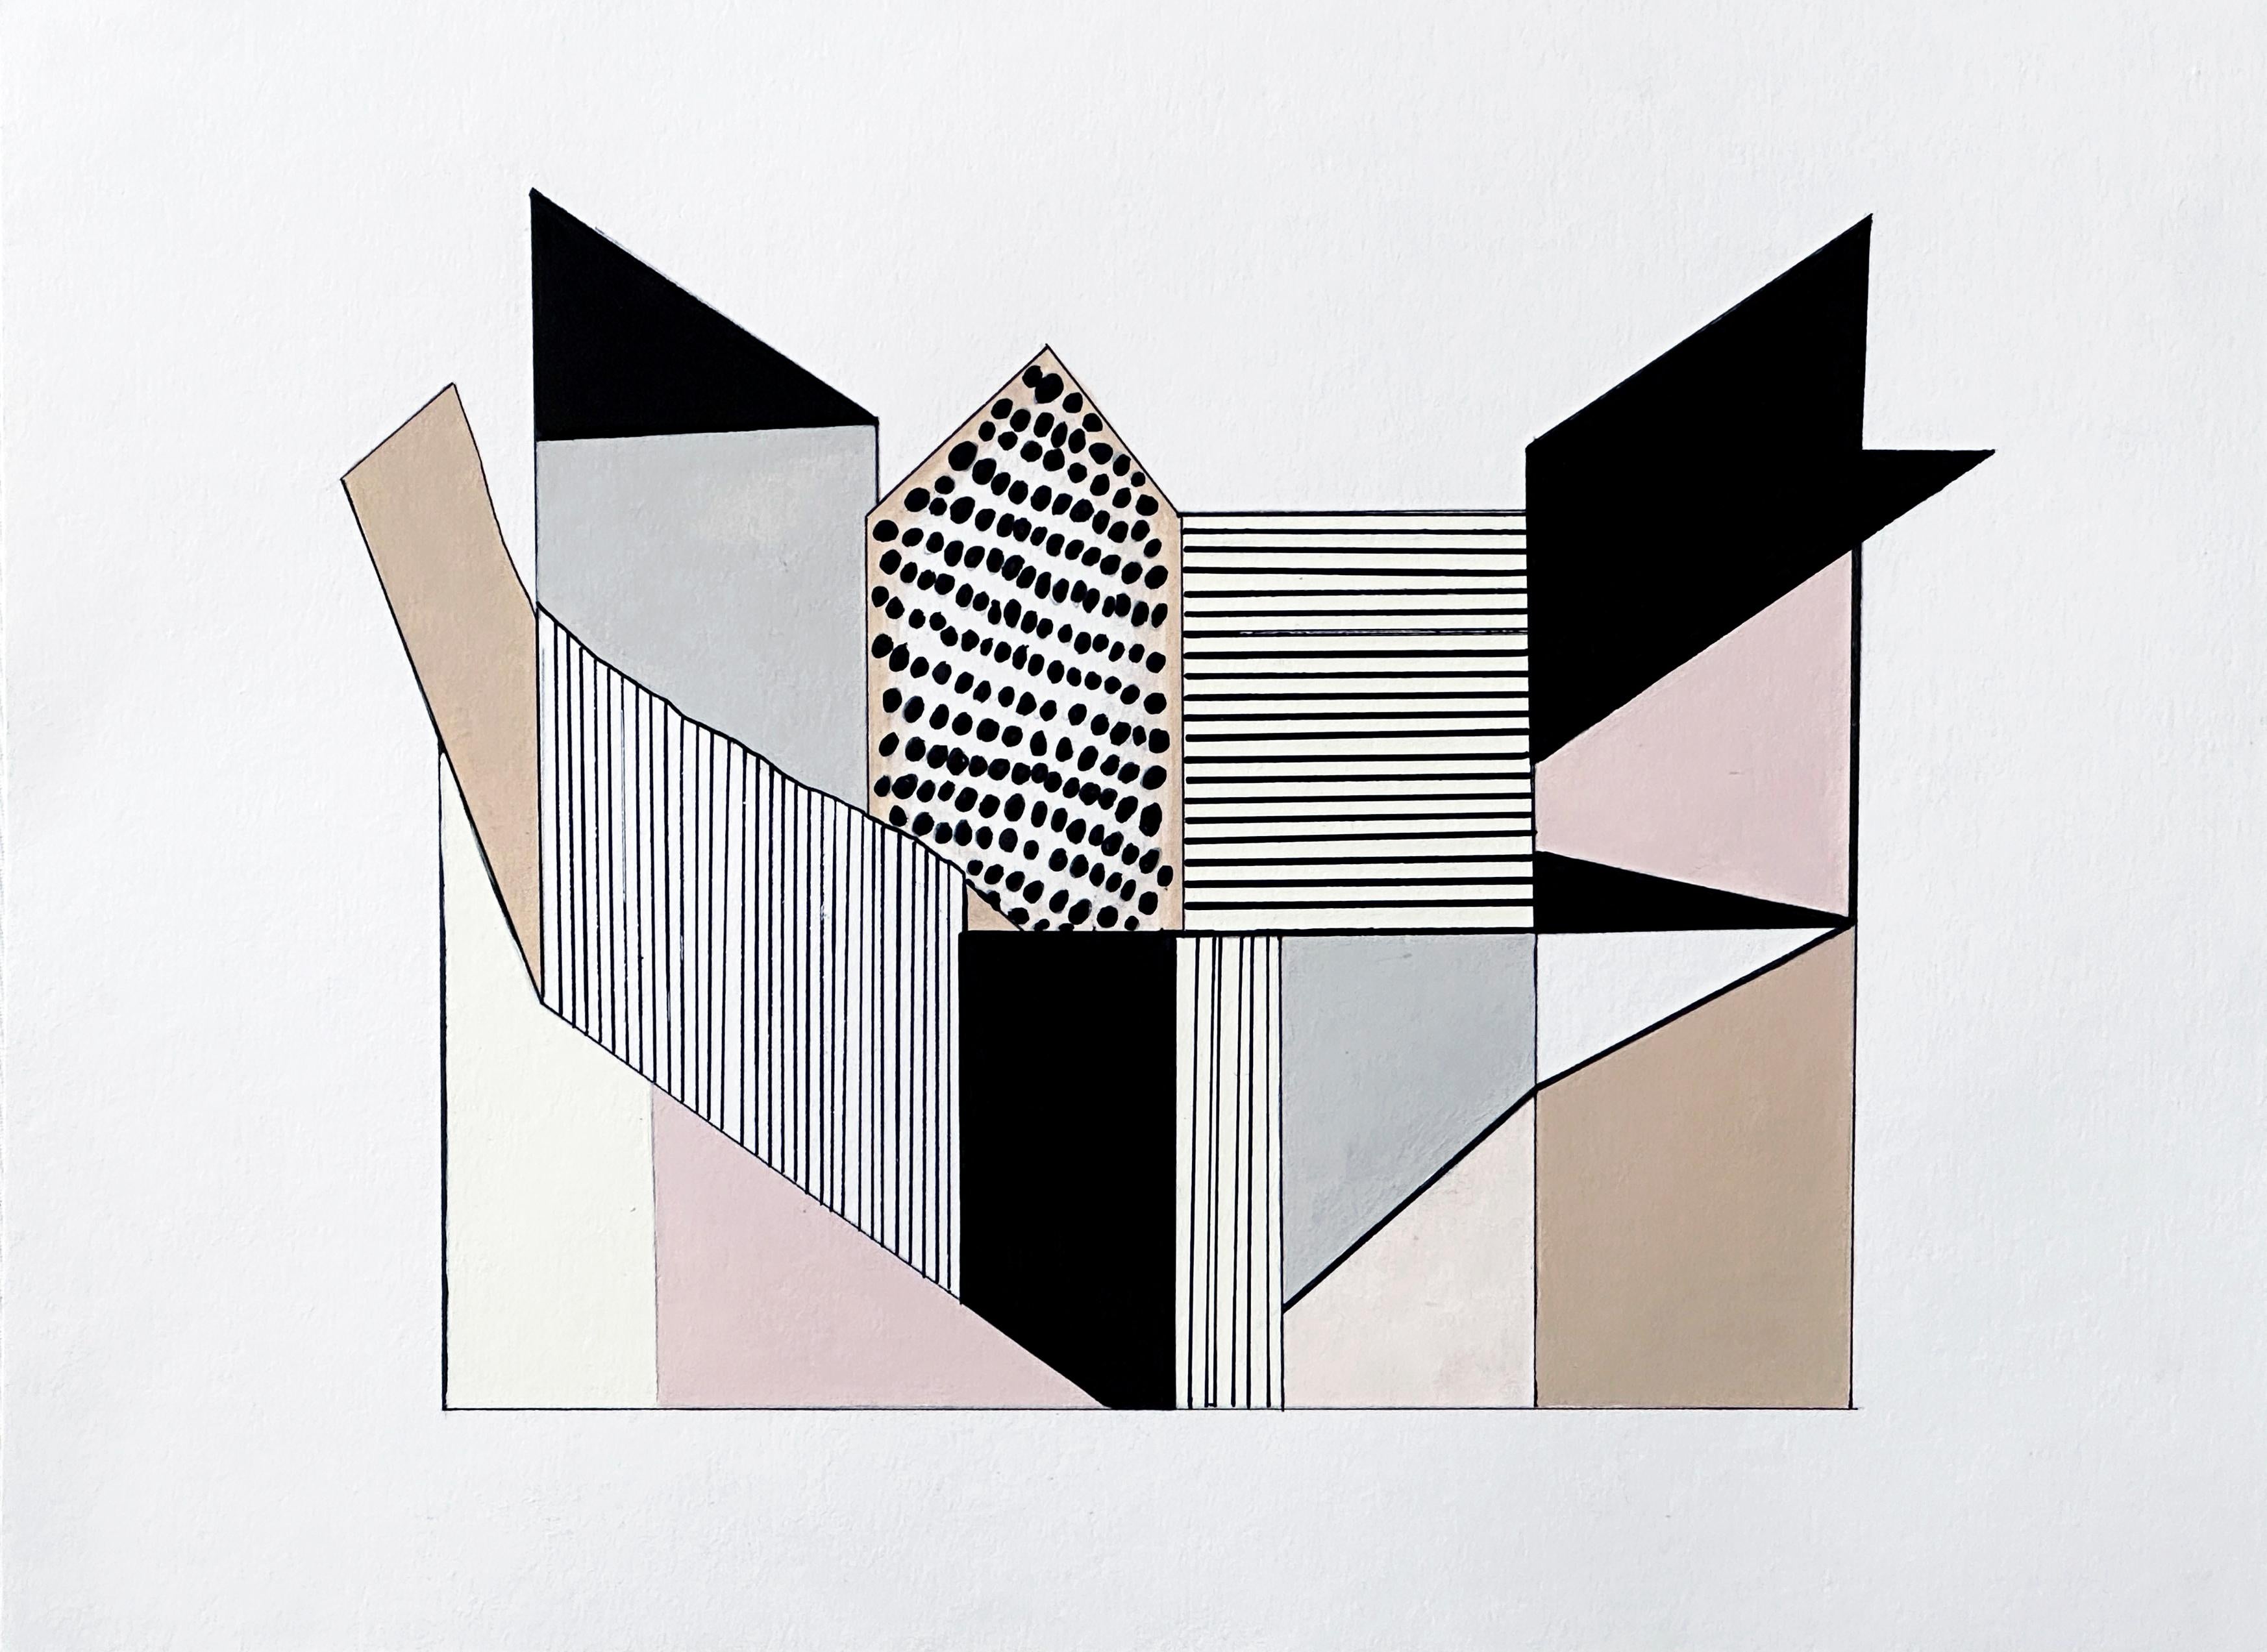 Amanda Andersen Abstract Painting - "Edifice II" contemporary drawing, abstract geometric, natural architecture